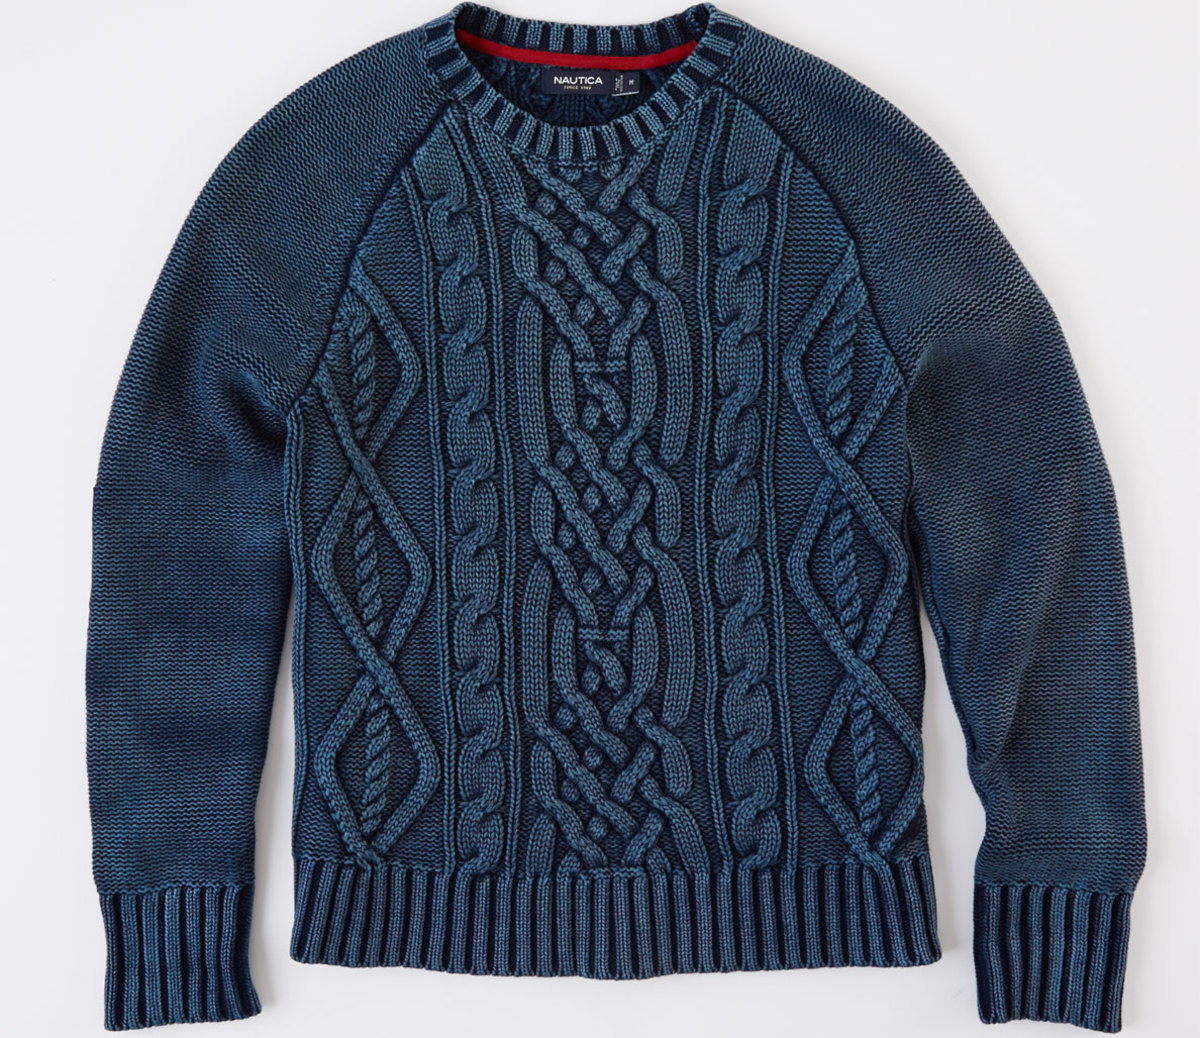 15 Lightweight Sweaters For Men in Multiple Colors and Price Points ...